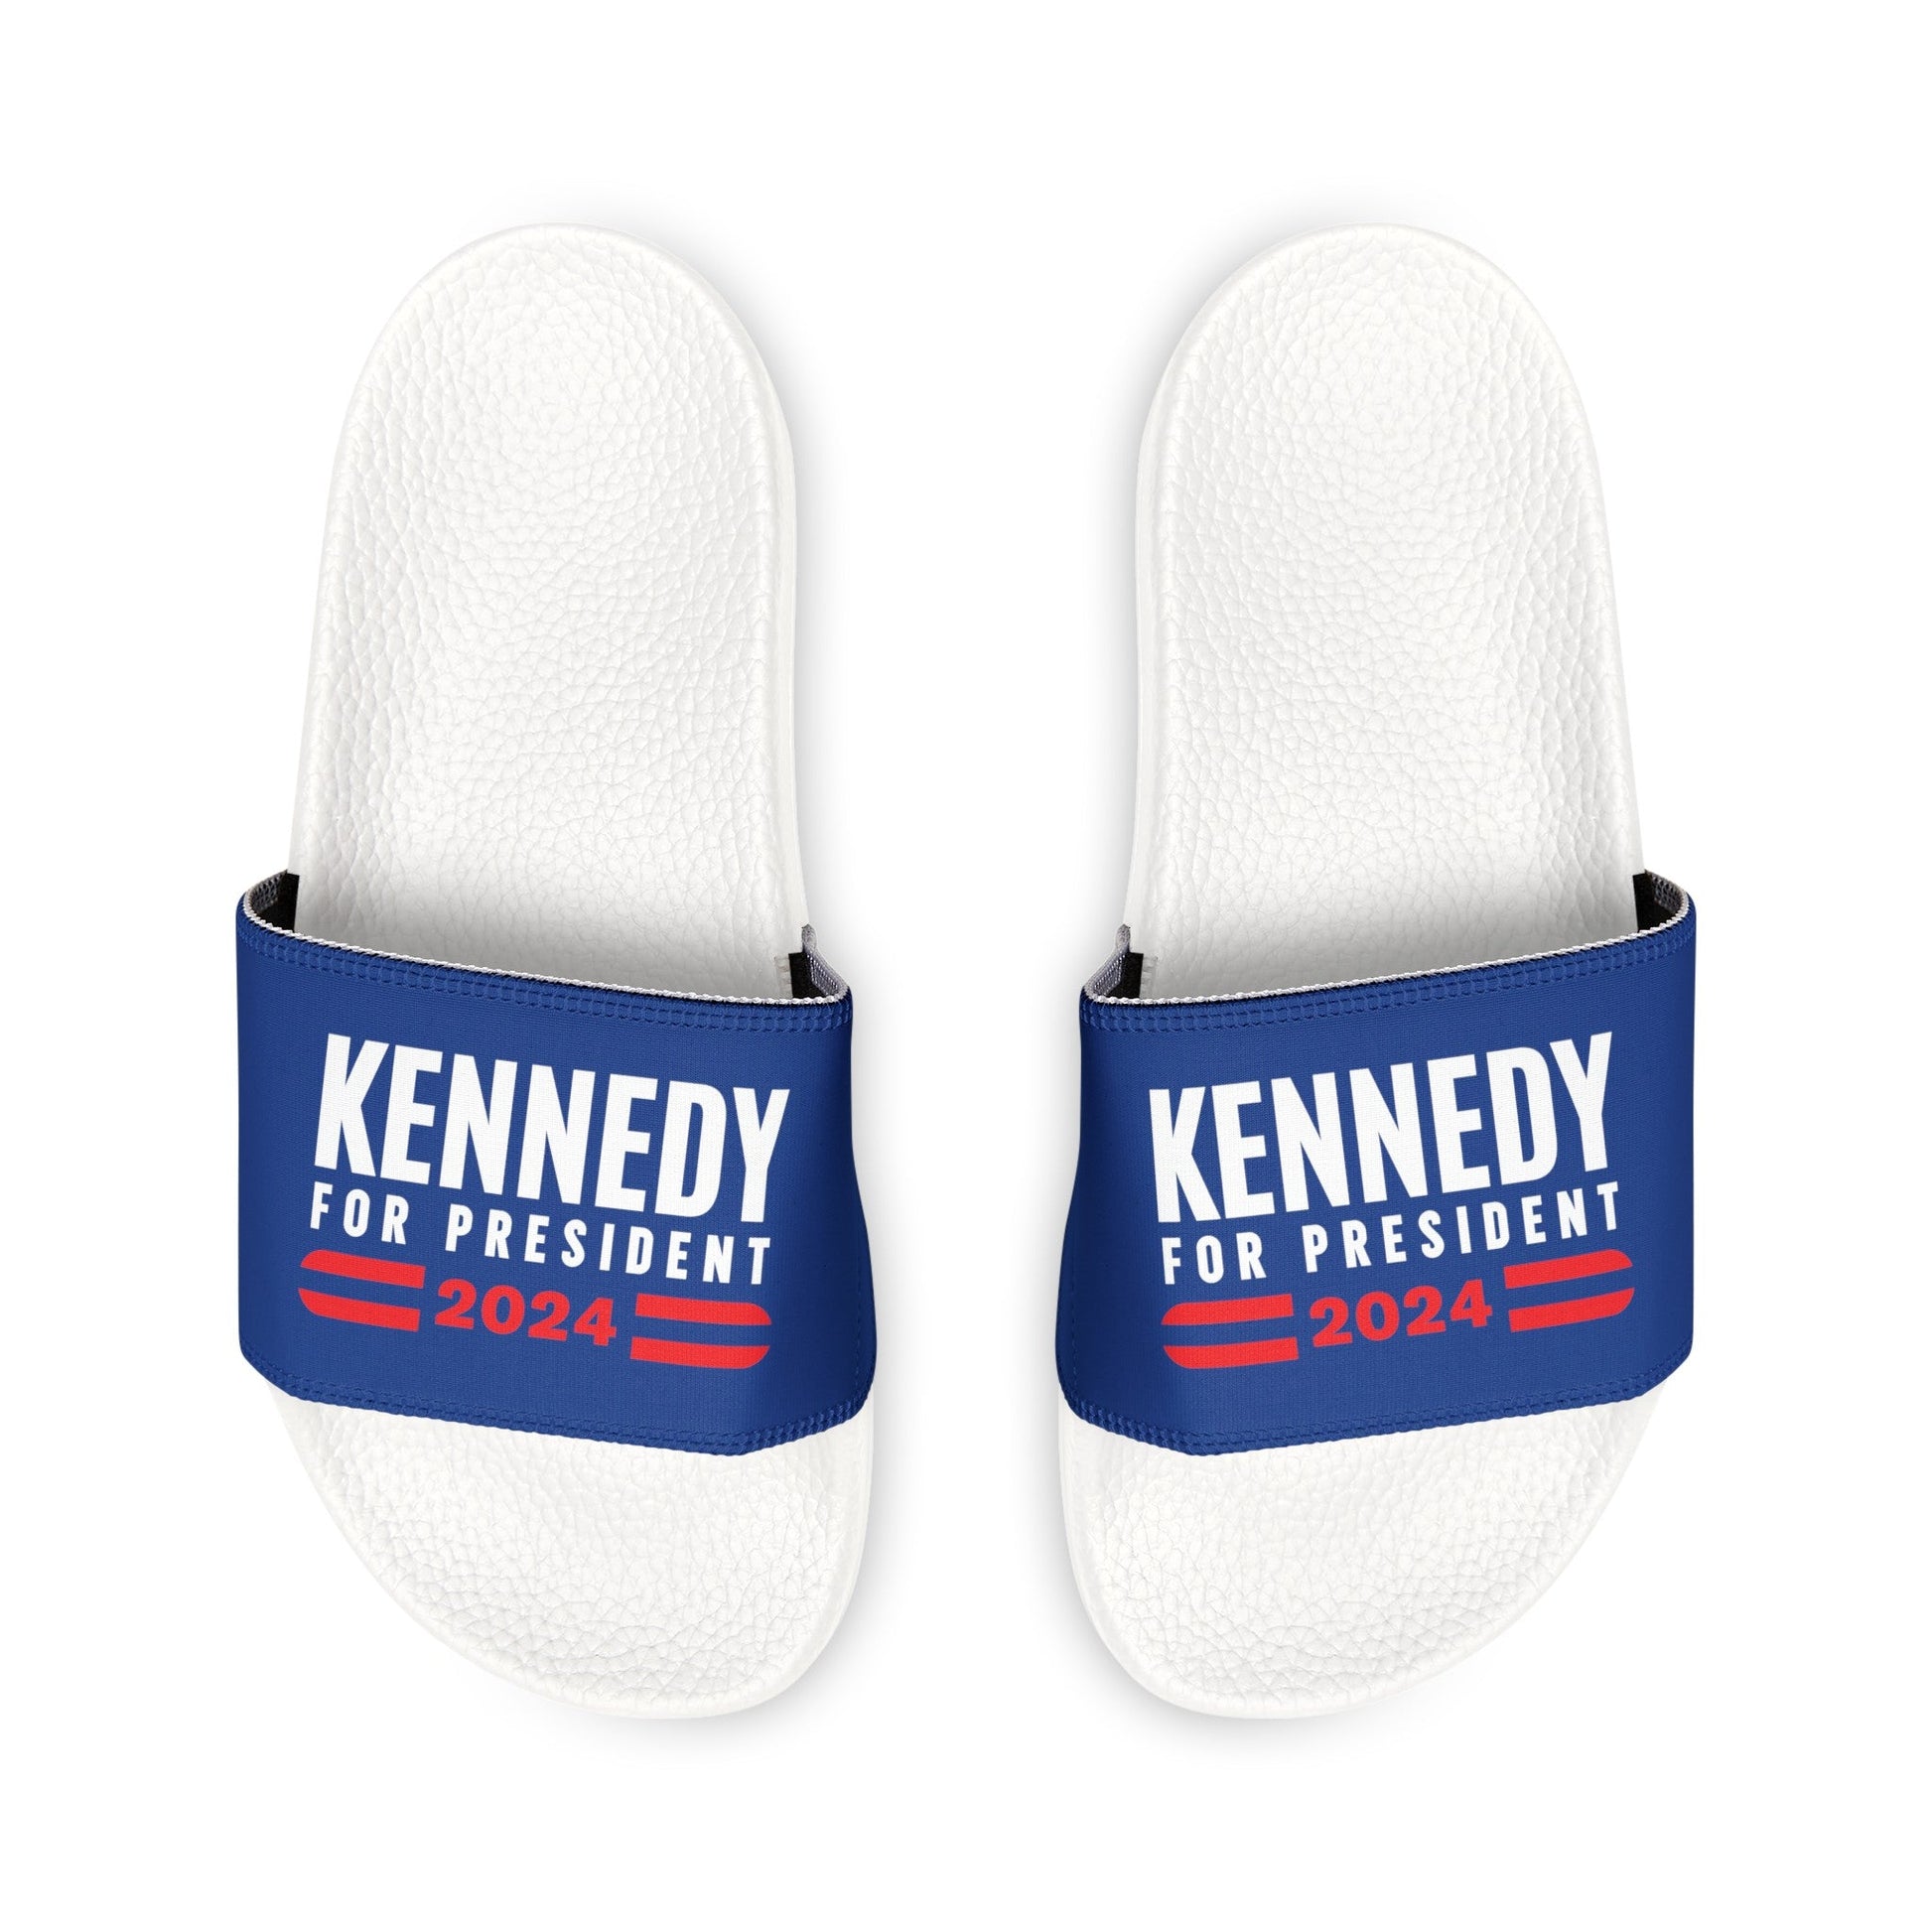 Kennedy for President 2024 Women's Slides - TEAM KENNEDY. All rights reserved